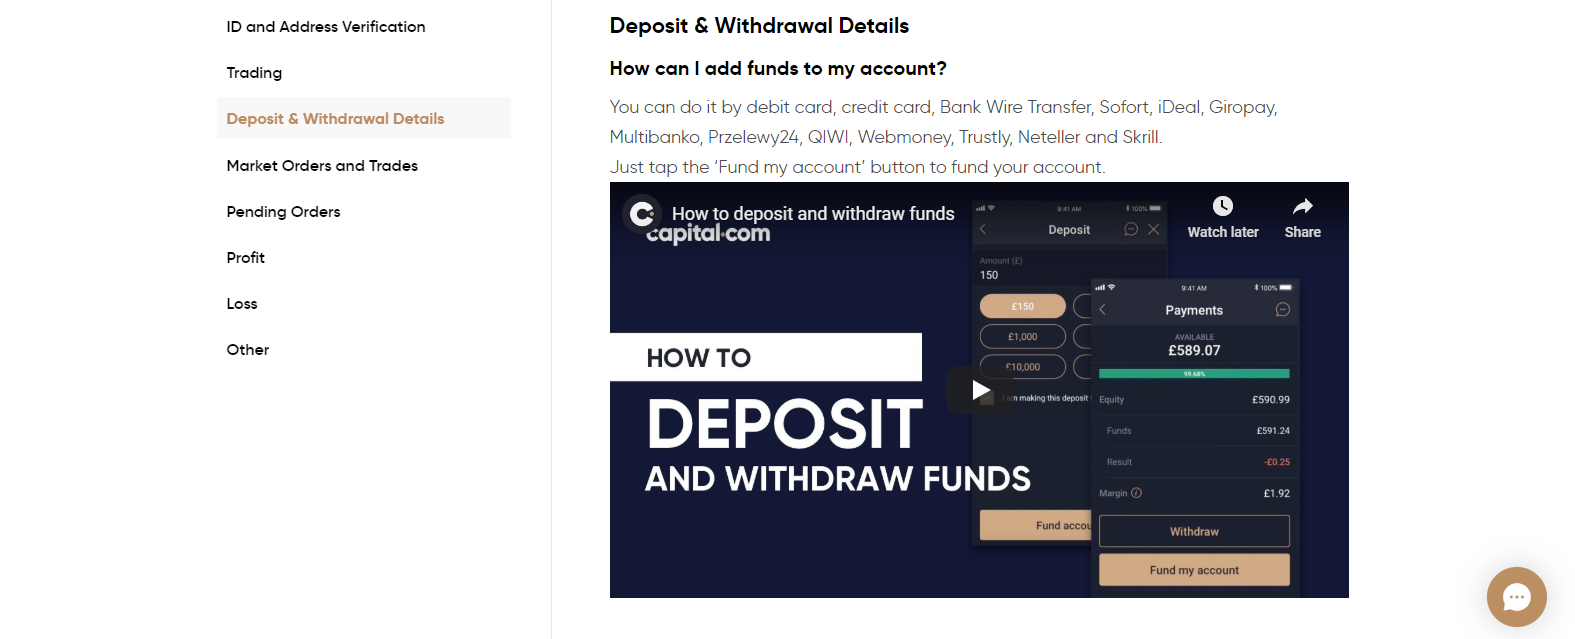 Capital.com Review deposit and withdrawal options